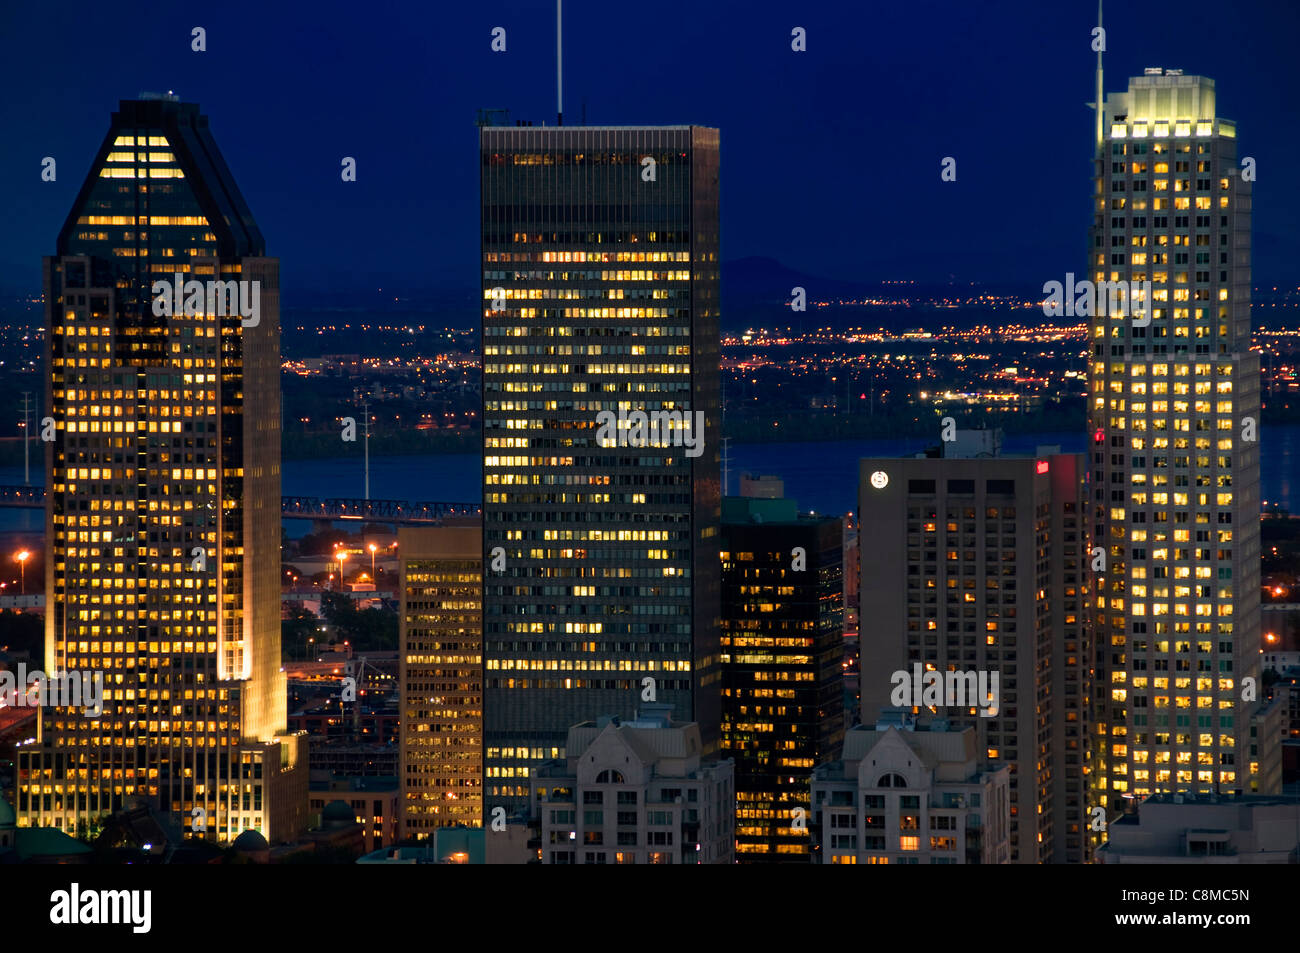 Skyline of downtown Montreal at night Stock Photo